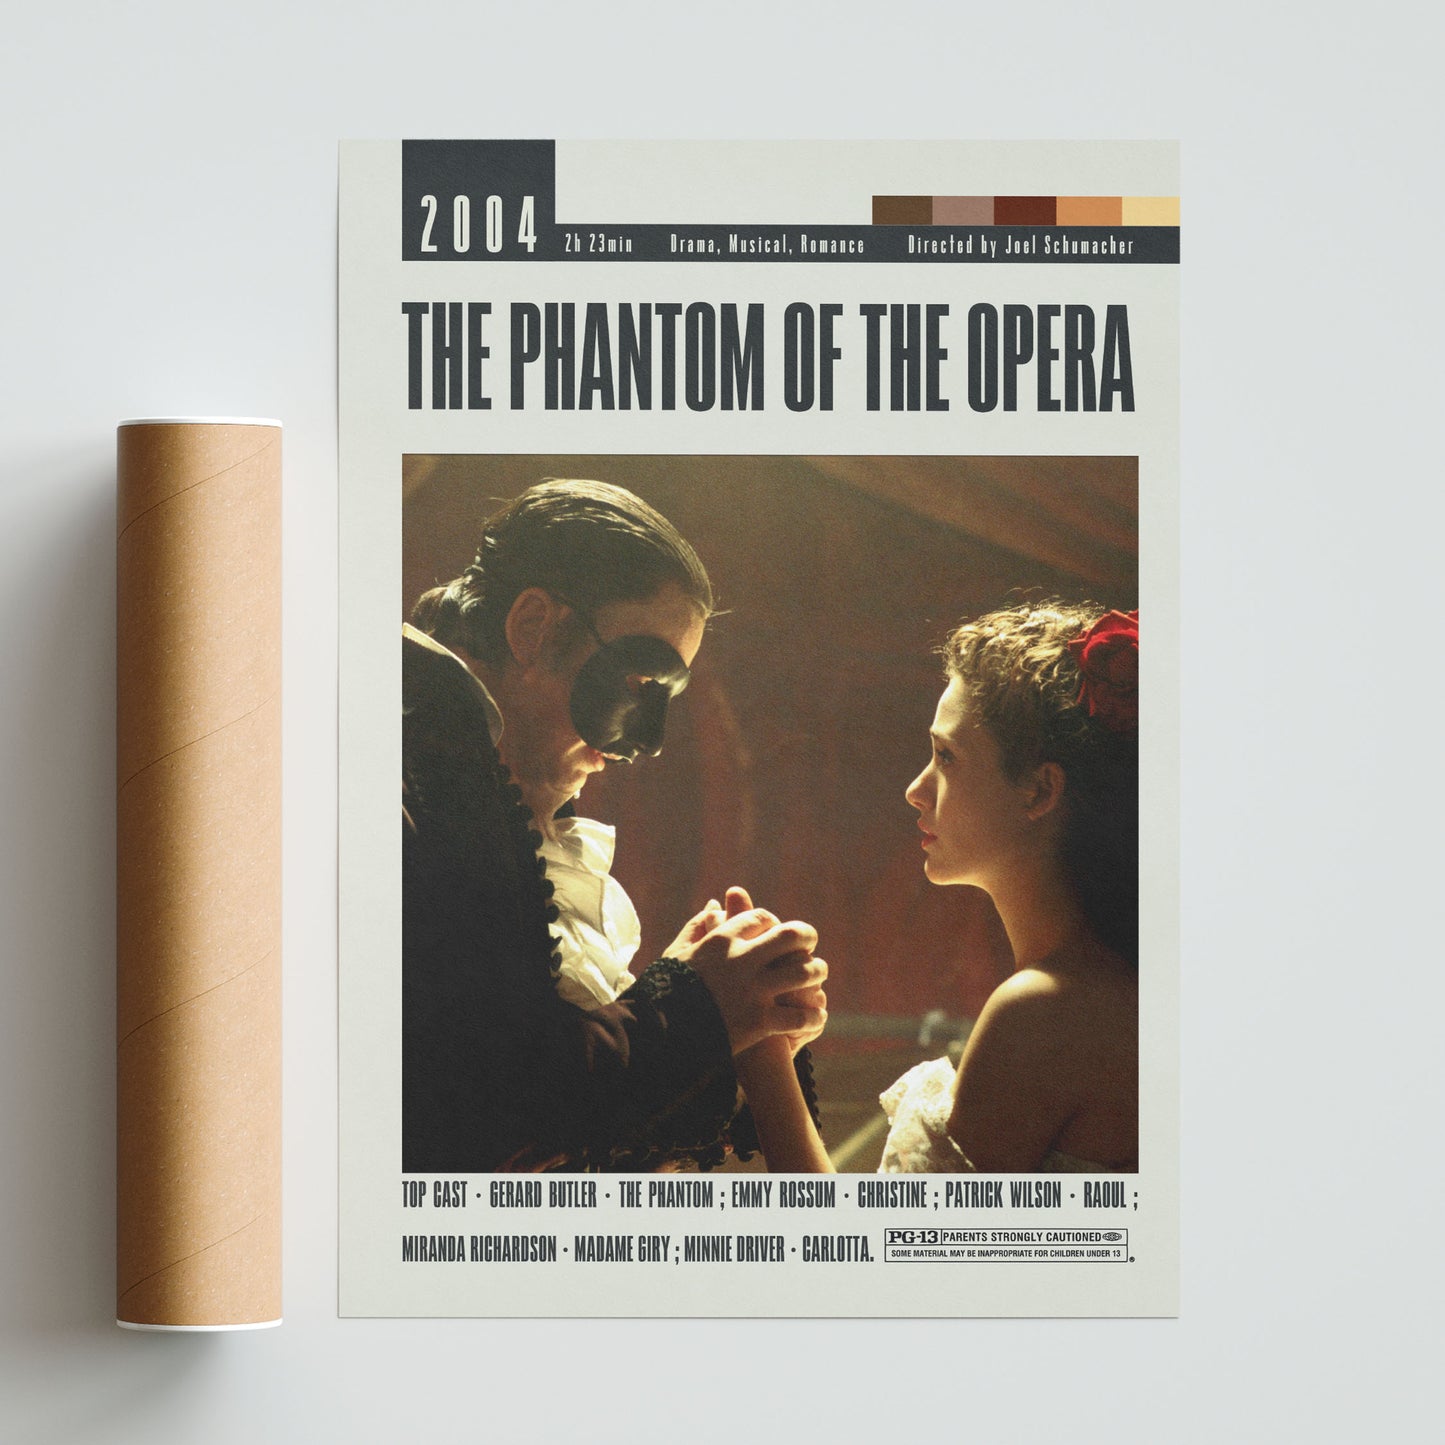 Upgrade your movie poster collection with the iconic Phantom of the Opera posters, featuring Joel Schumacher's timeless film. These original movie posters from the UK are both cheap and large, making them the perfect addition to any movie lover's home. With vintage and minimalist designs, these unframed posters add a touch of retro charm to your wall art décor.